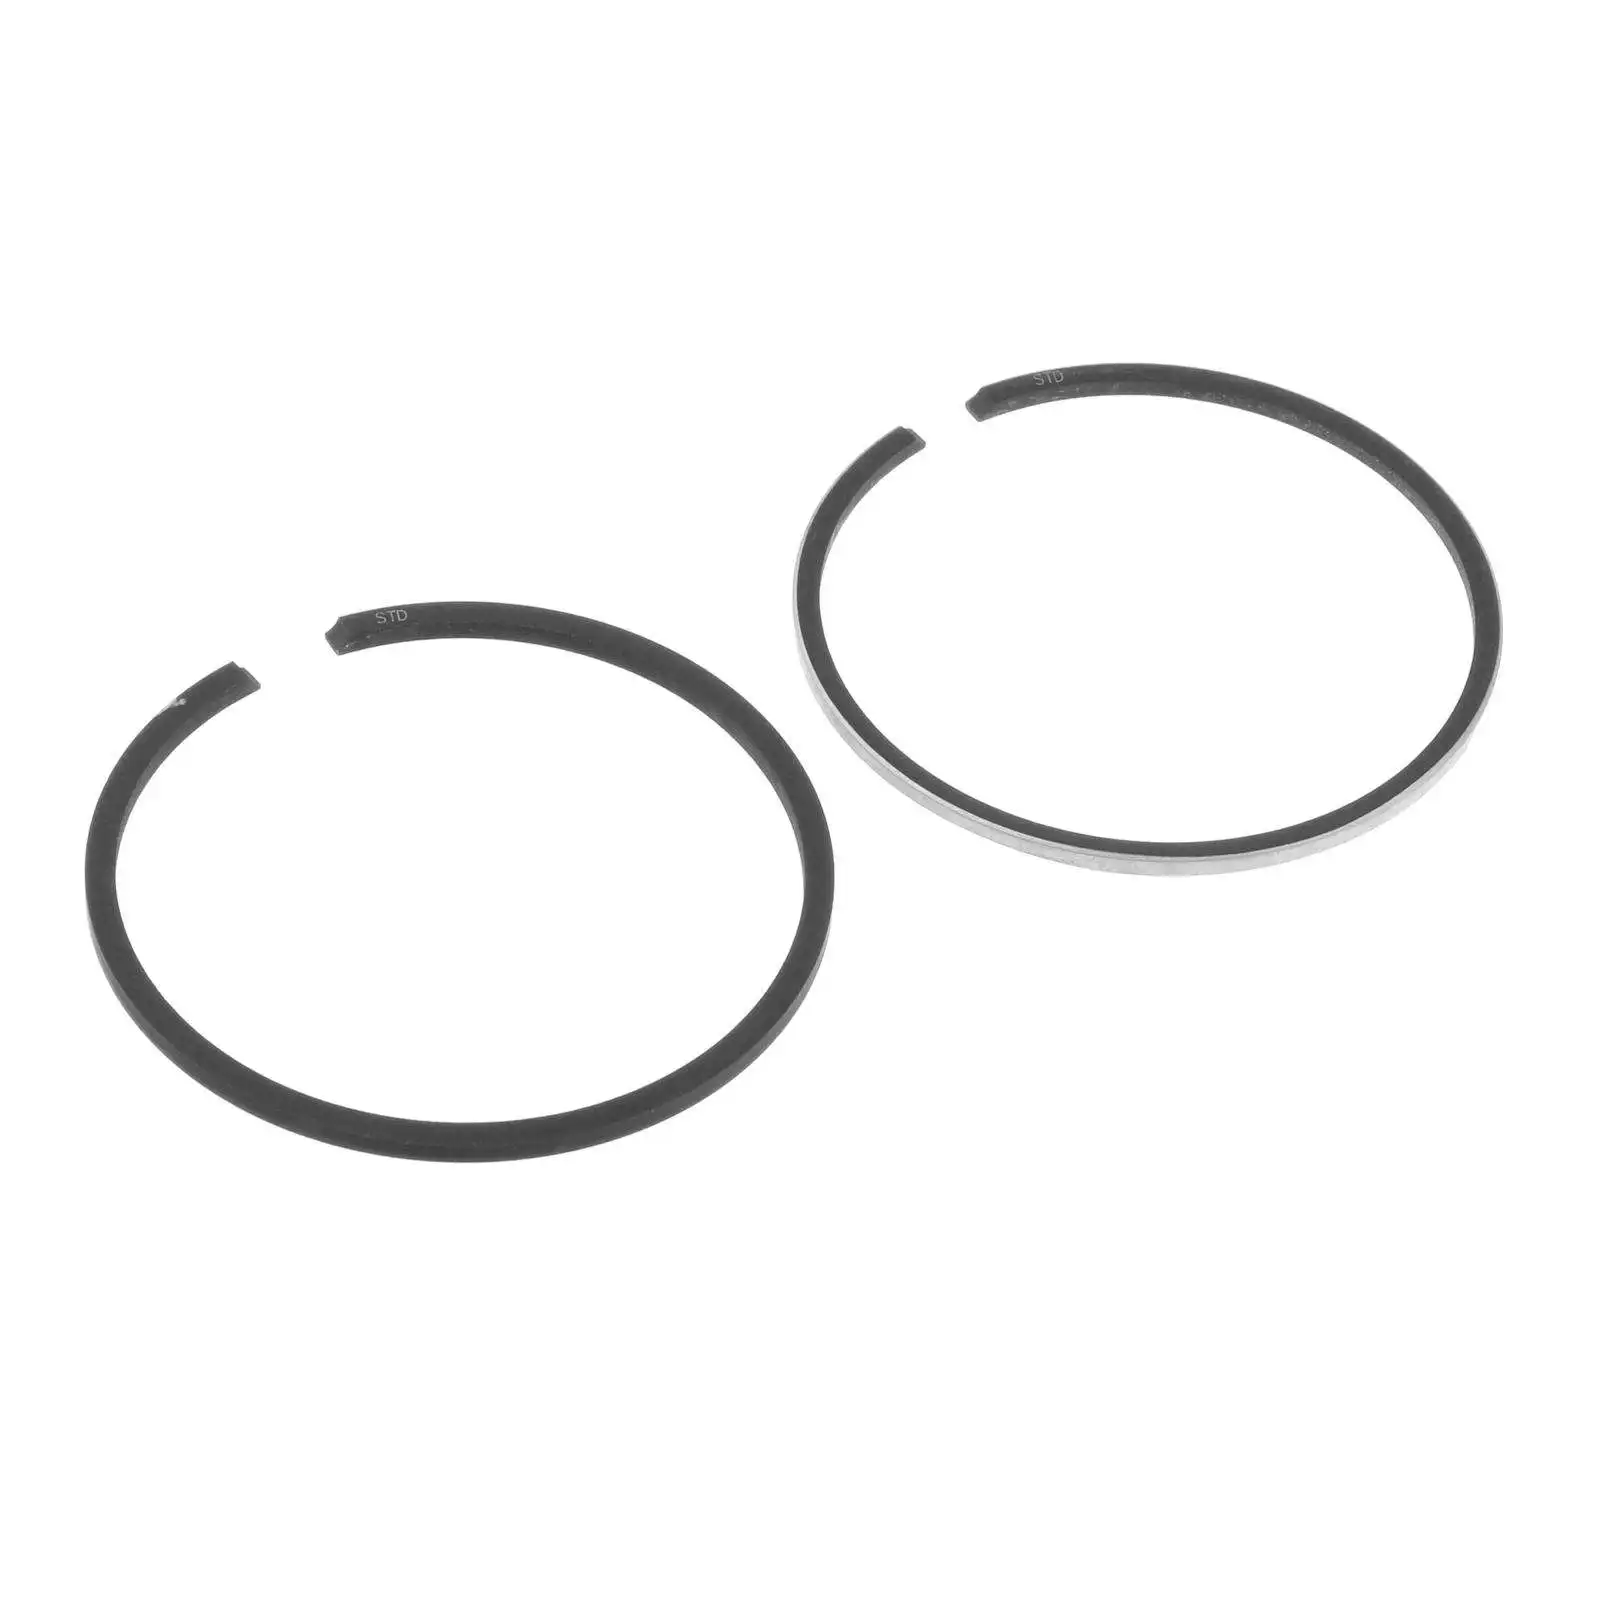 2pcs Engine Piston Rings Set 682-11610-01-00 for Powertec 9.9HP Outboards